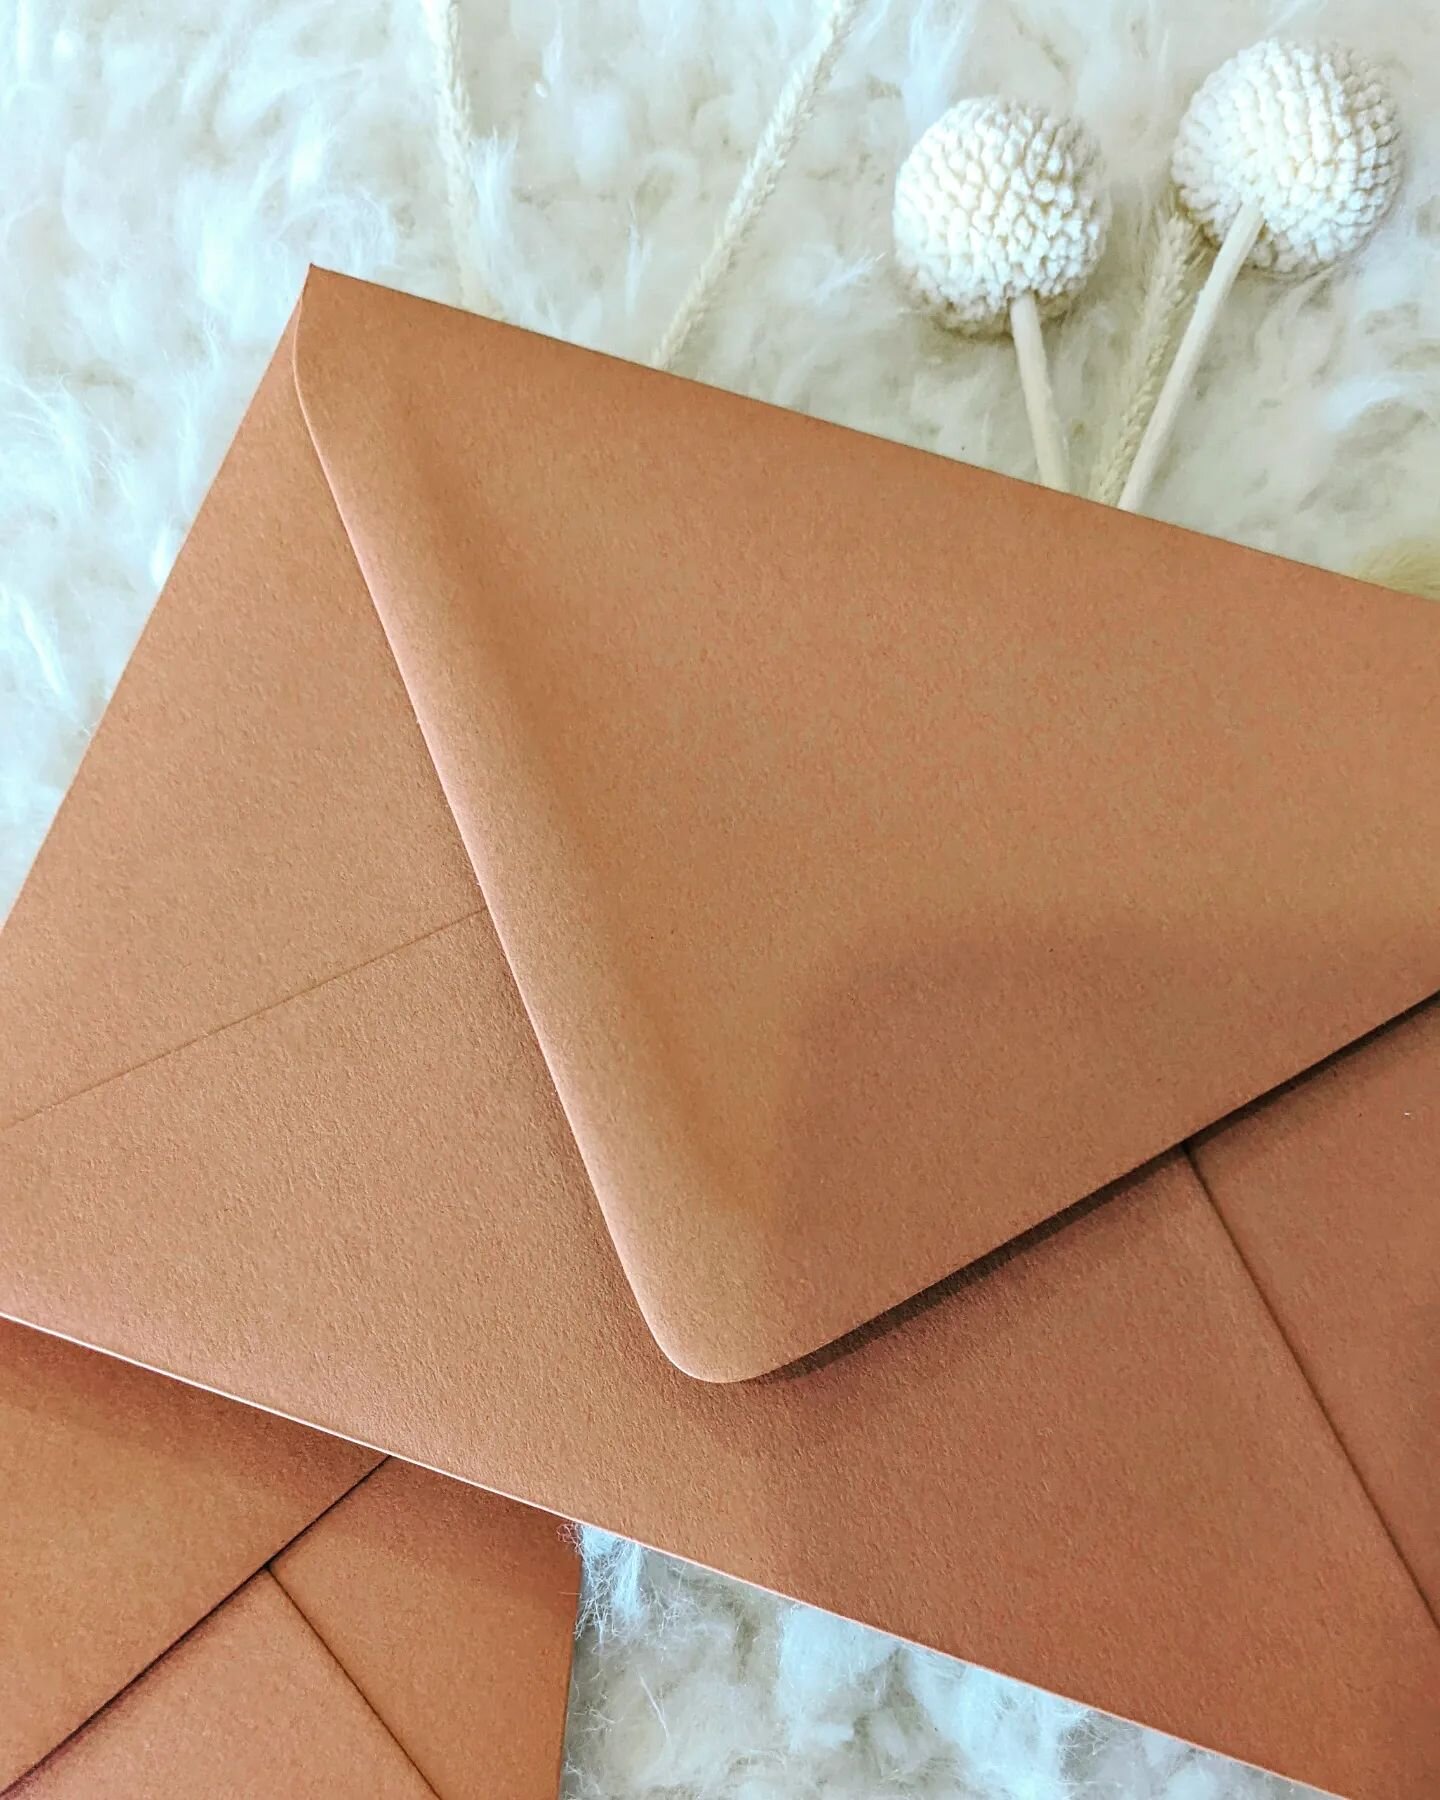 OH EM GEEEEE! all my Southwest, Boho, earthy Vibes lovin' couples, we just got the holy grail of new envelope and cardstock colors in, the most perfect Terracotta!!!! It's stunning in person, I can't wait to see how you all use it. It's been the bigg